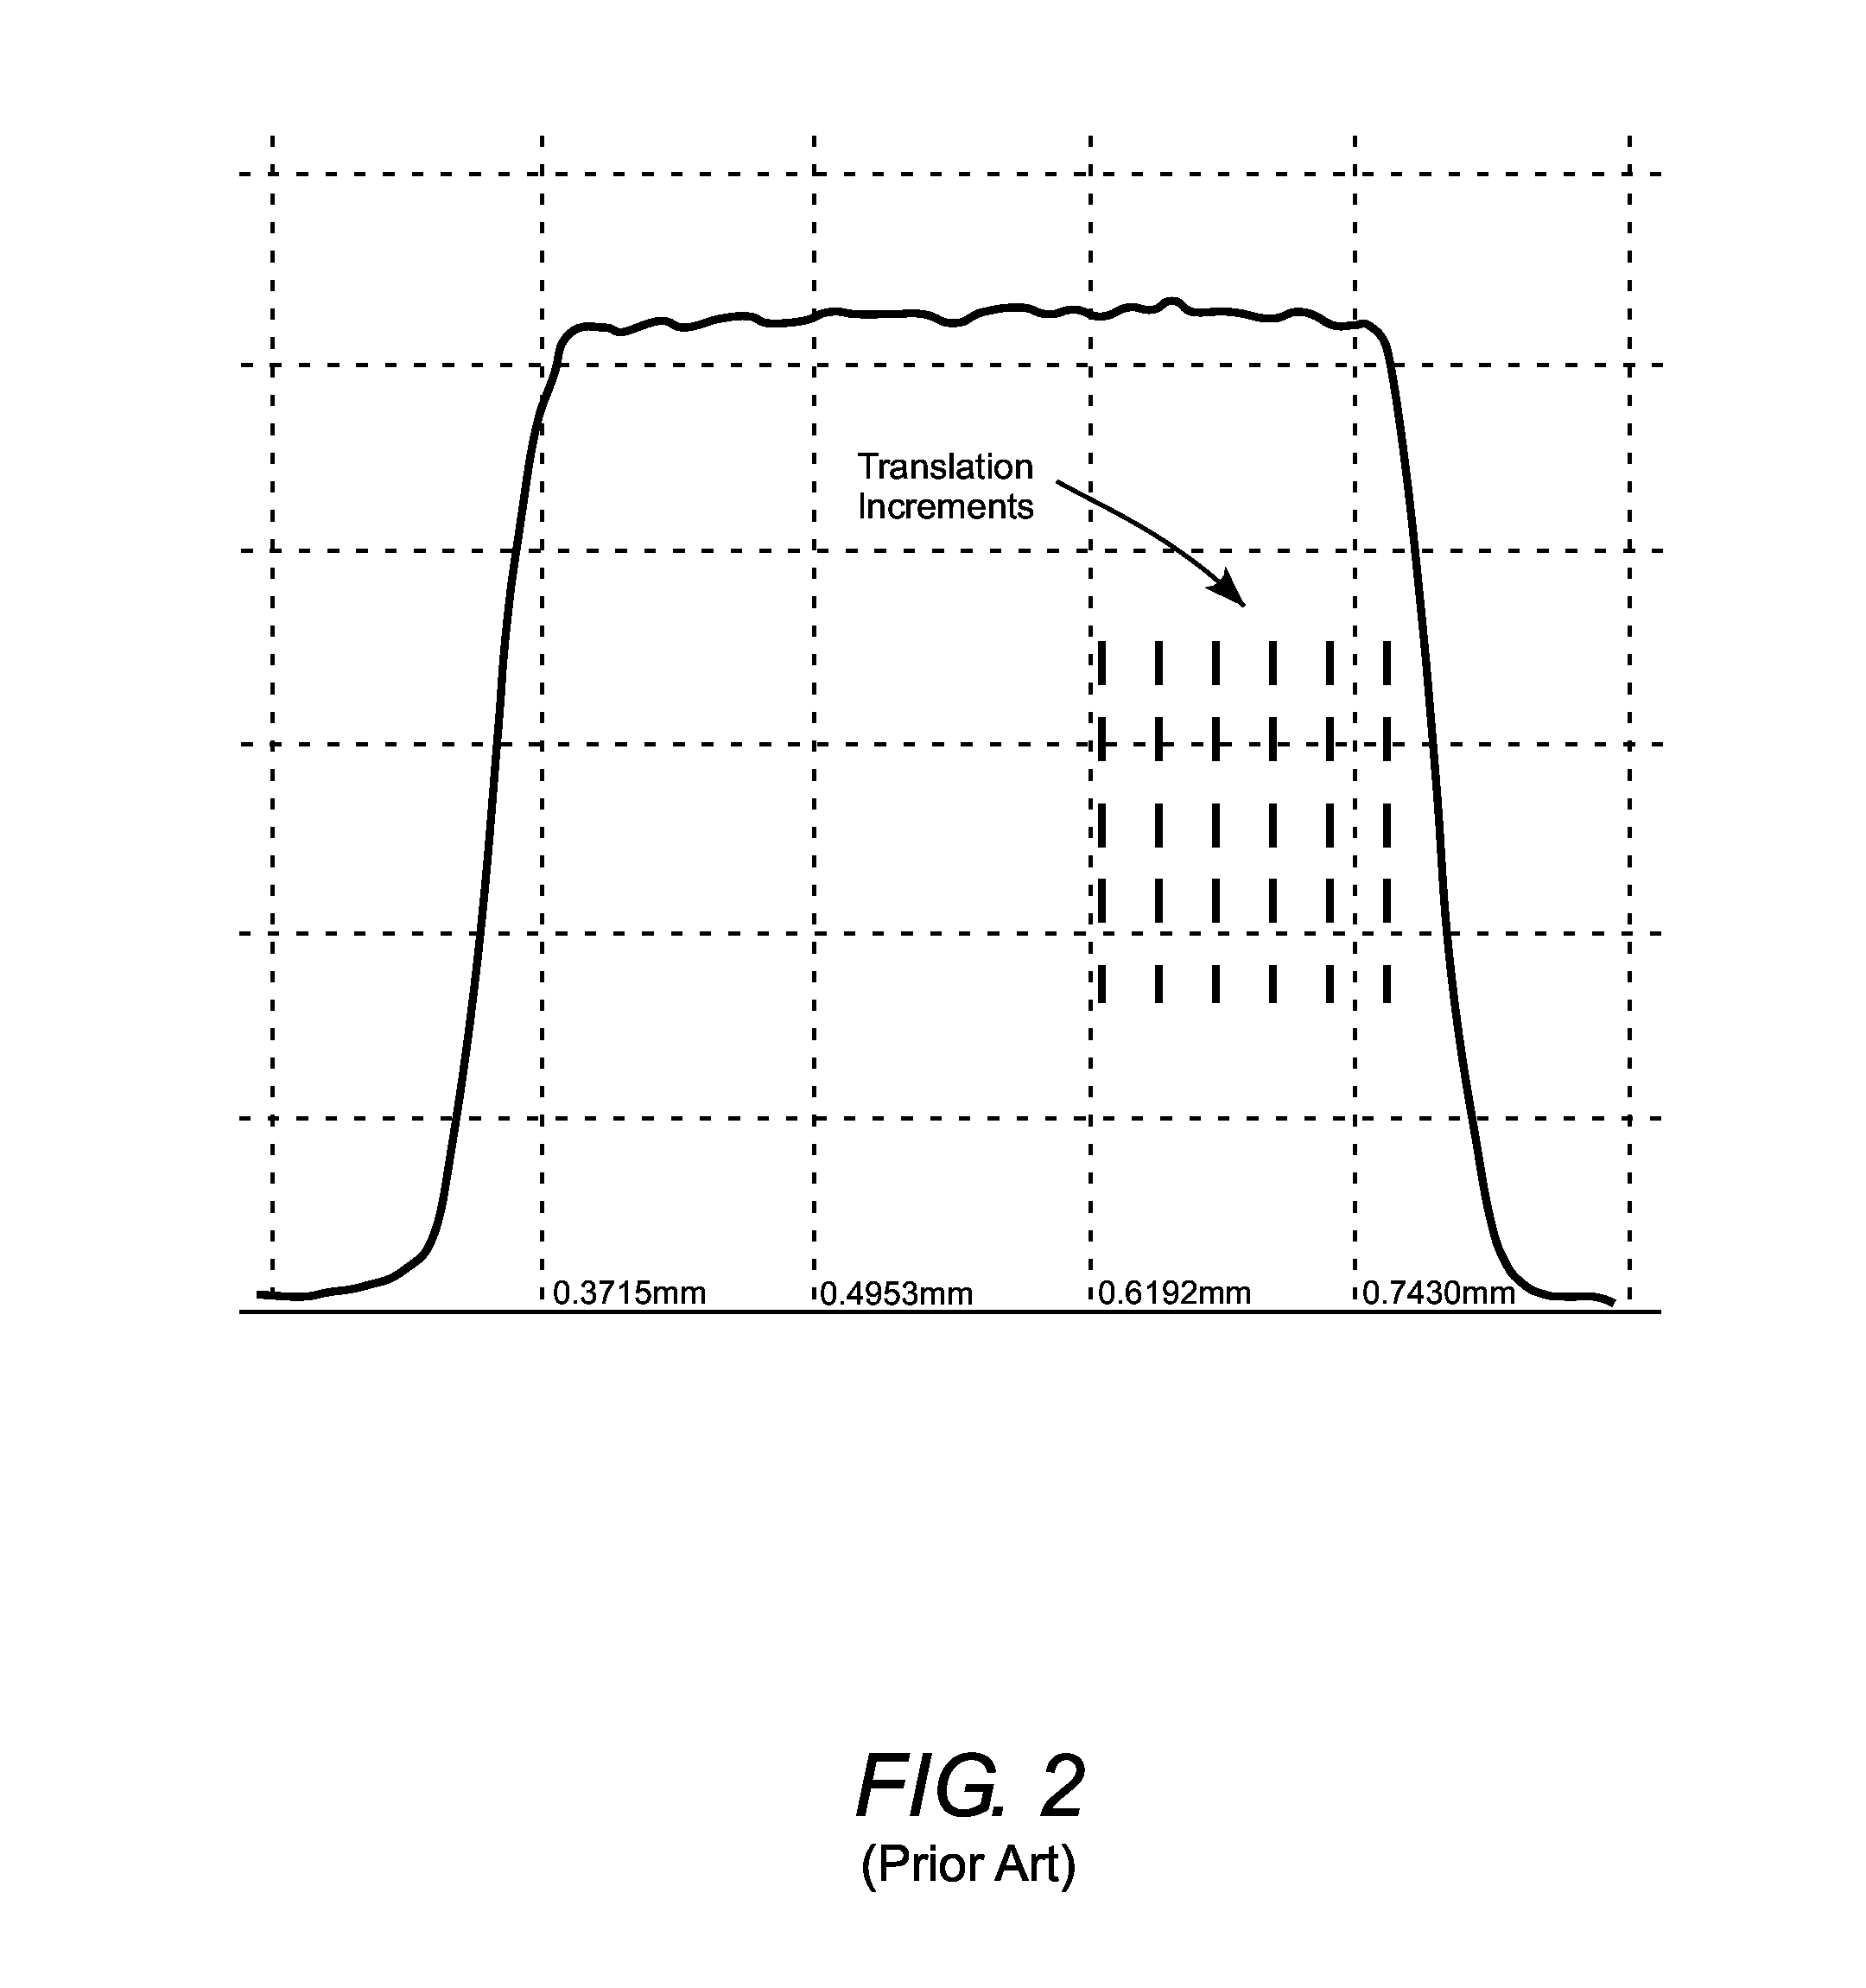 Excimer laser apparatus projecting a beam with a selectively variable short-axis beam profile